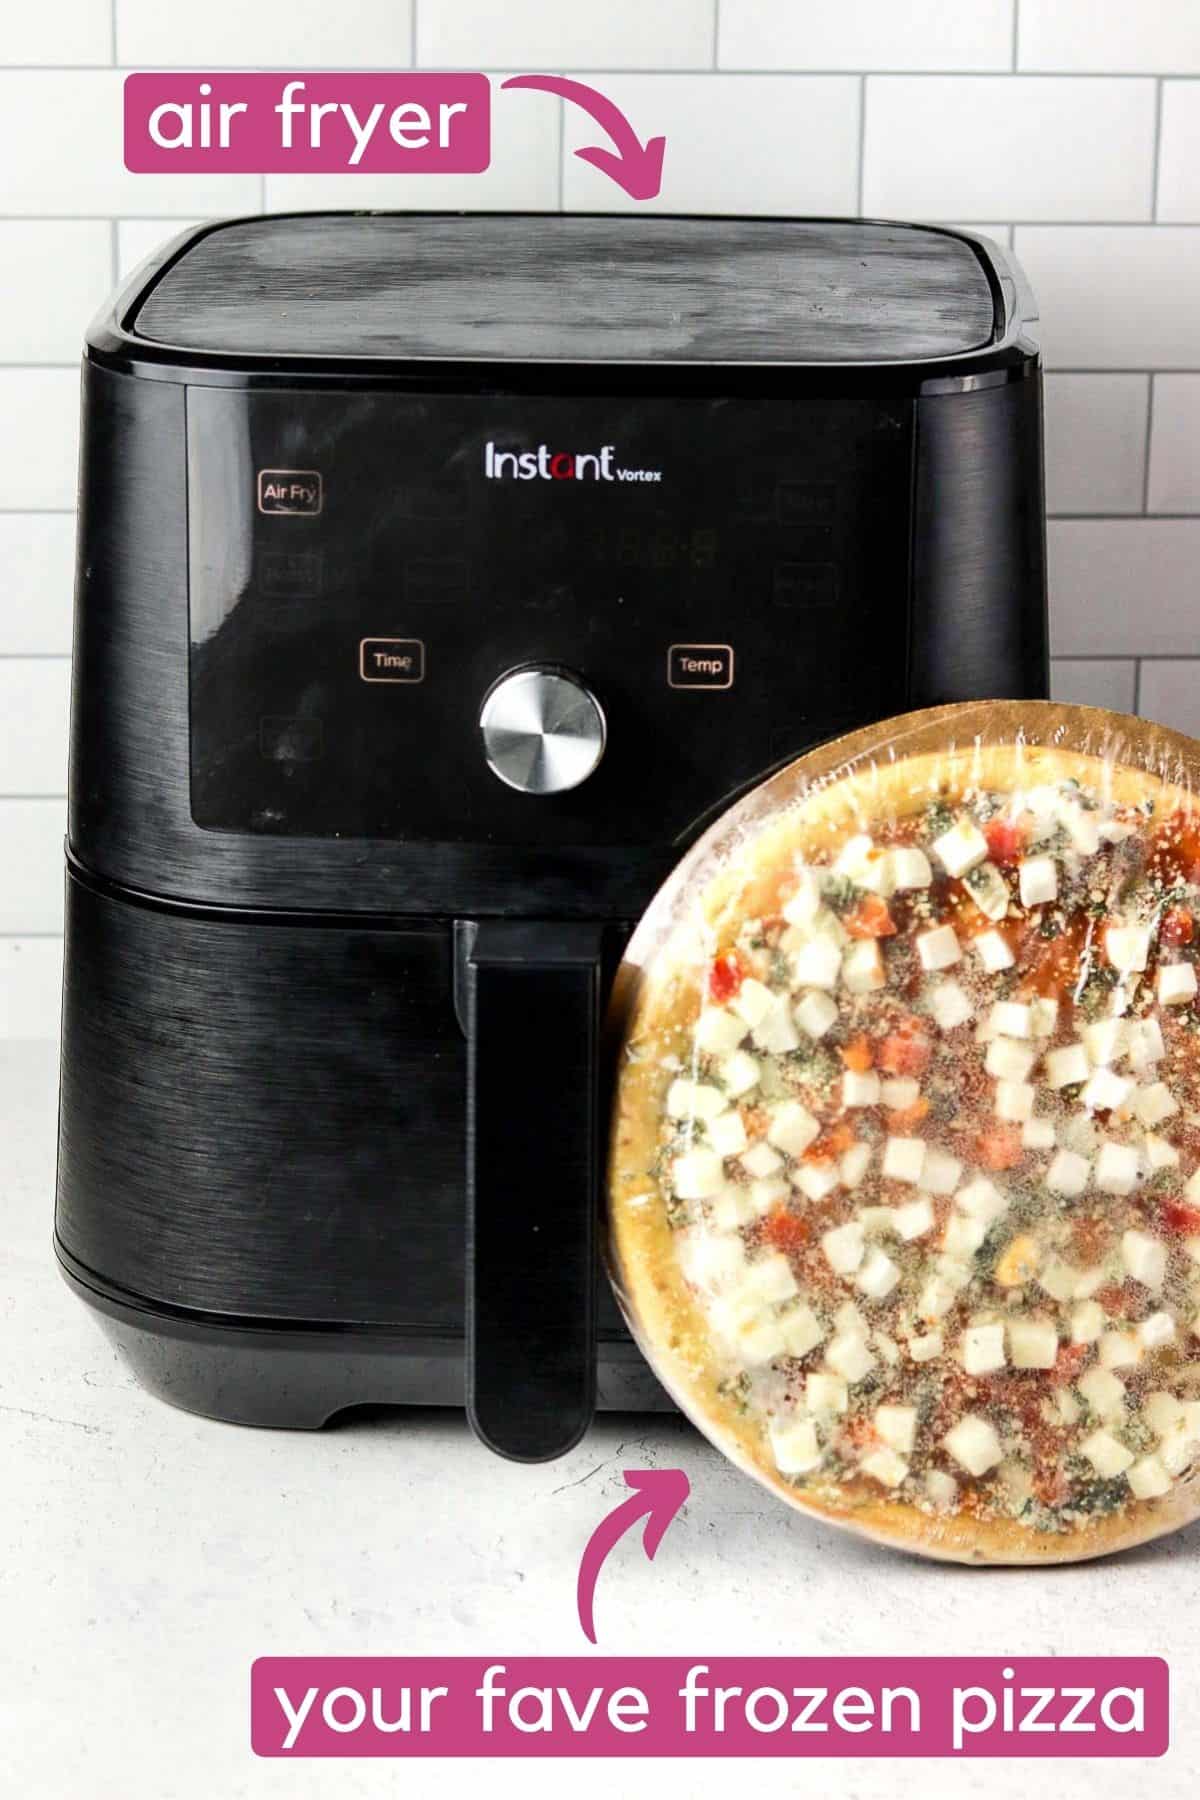 Air fryer and a frozen pizza on the counter.